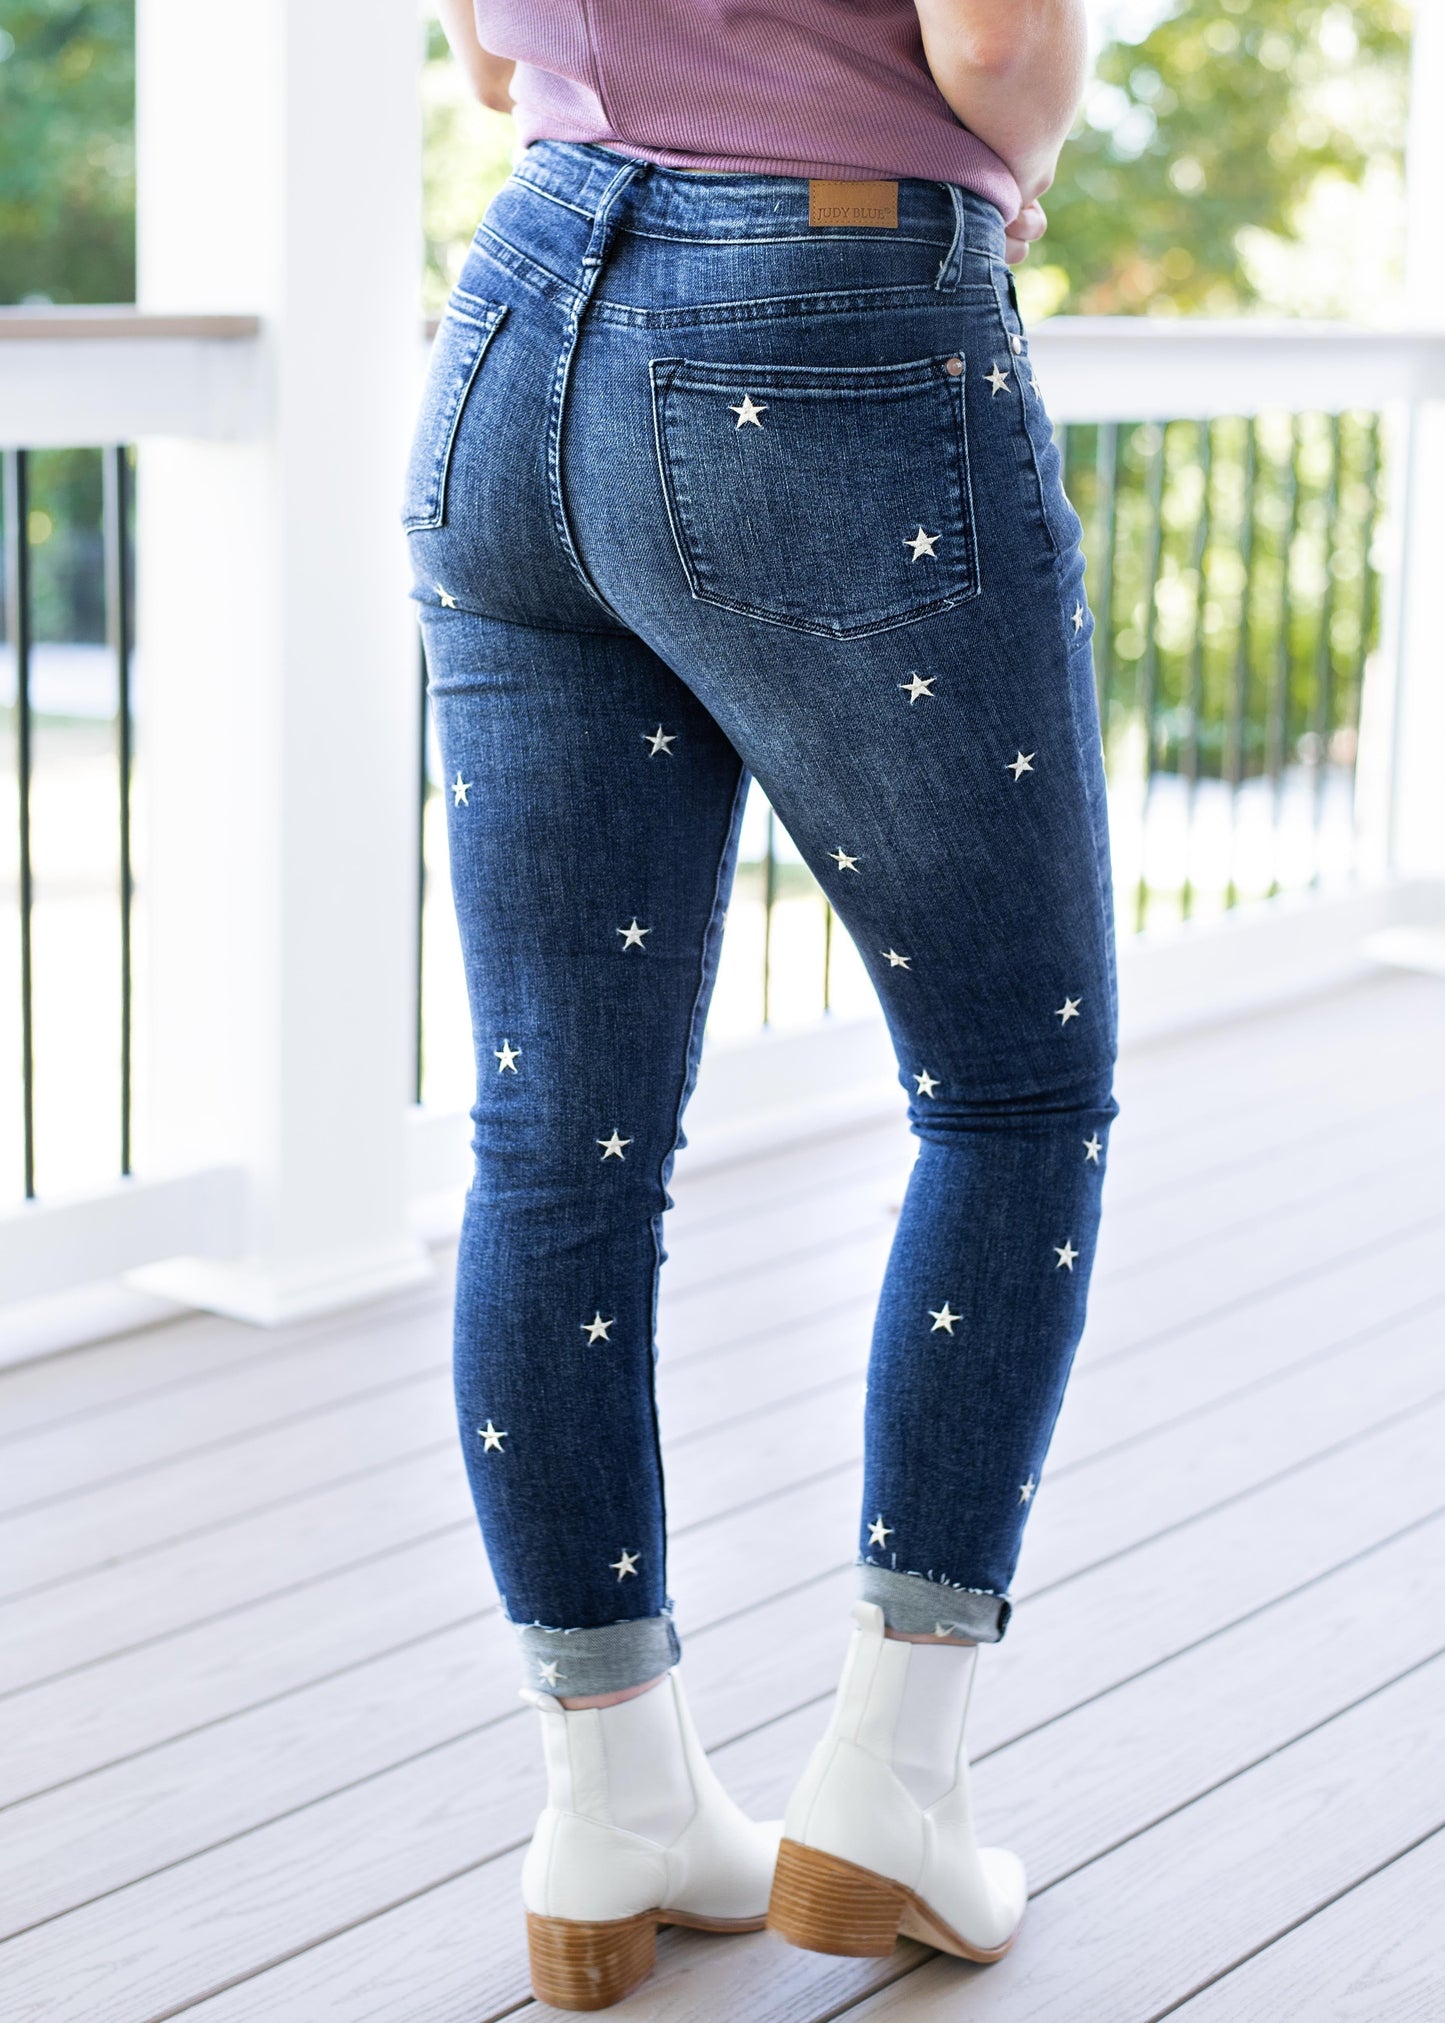 Judy Blue Shine Bright Star Embroidered Skinny Jeans